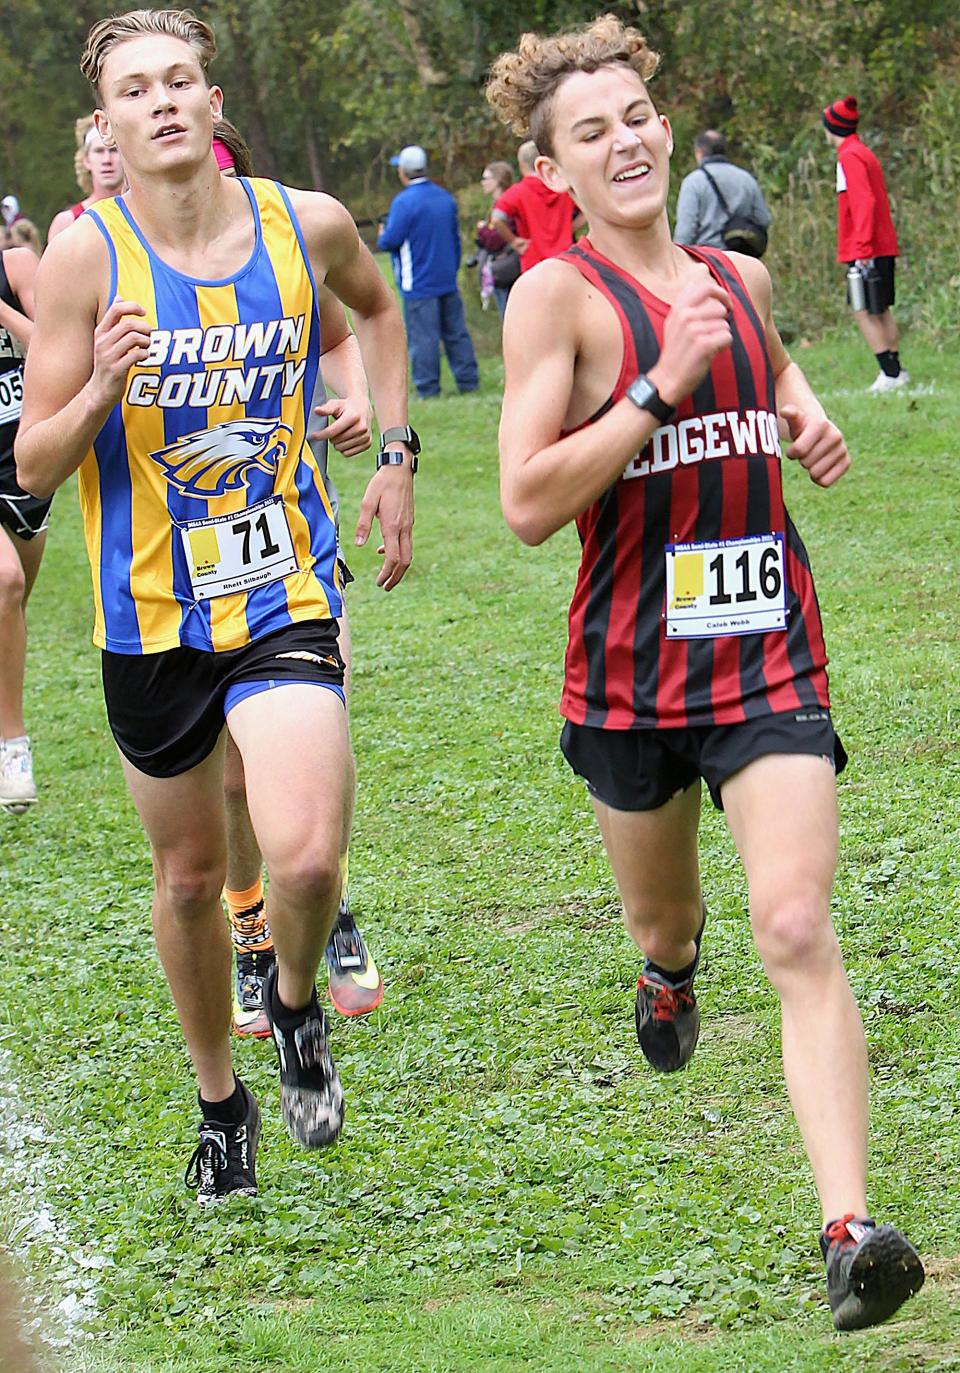 Edgewood's Caleb Webb competes in the Brown County cross country semi-state meet on Saturday, Oct. 23, 2021.